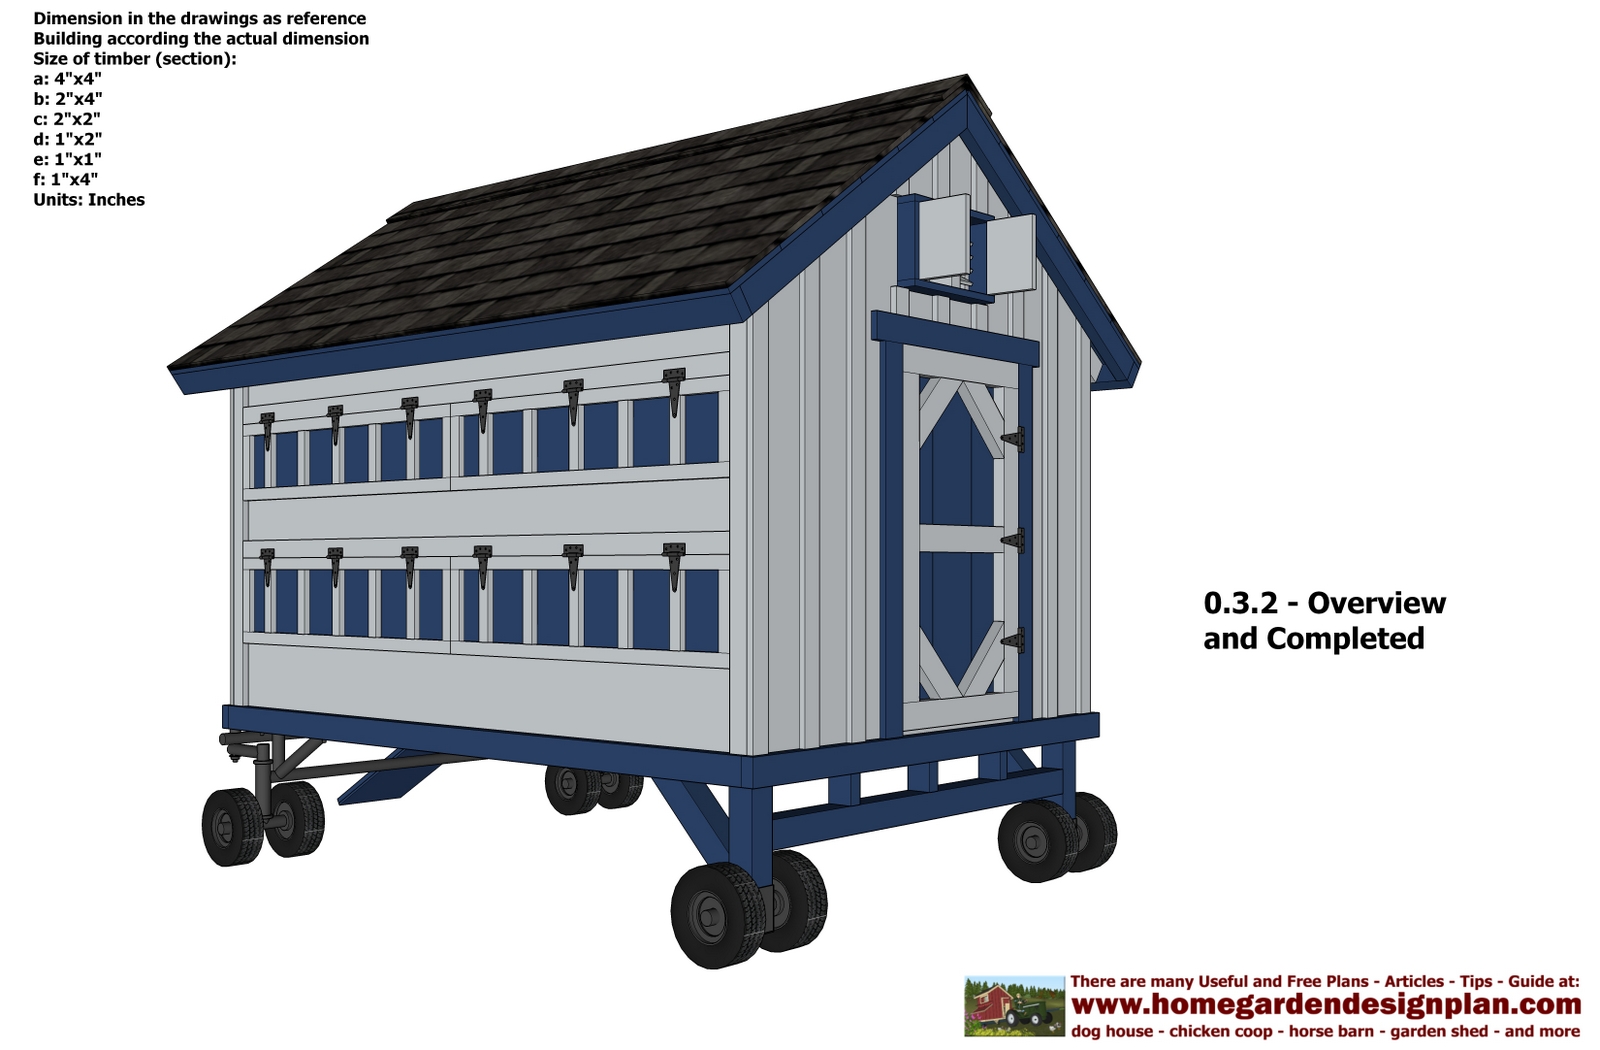 ... - Free Chicken Coop Tractor Plans - How to build a Chicken Coop